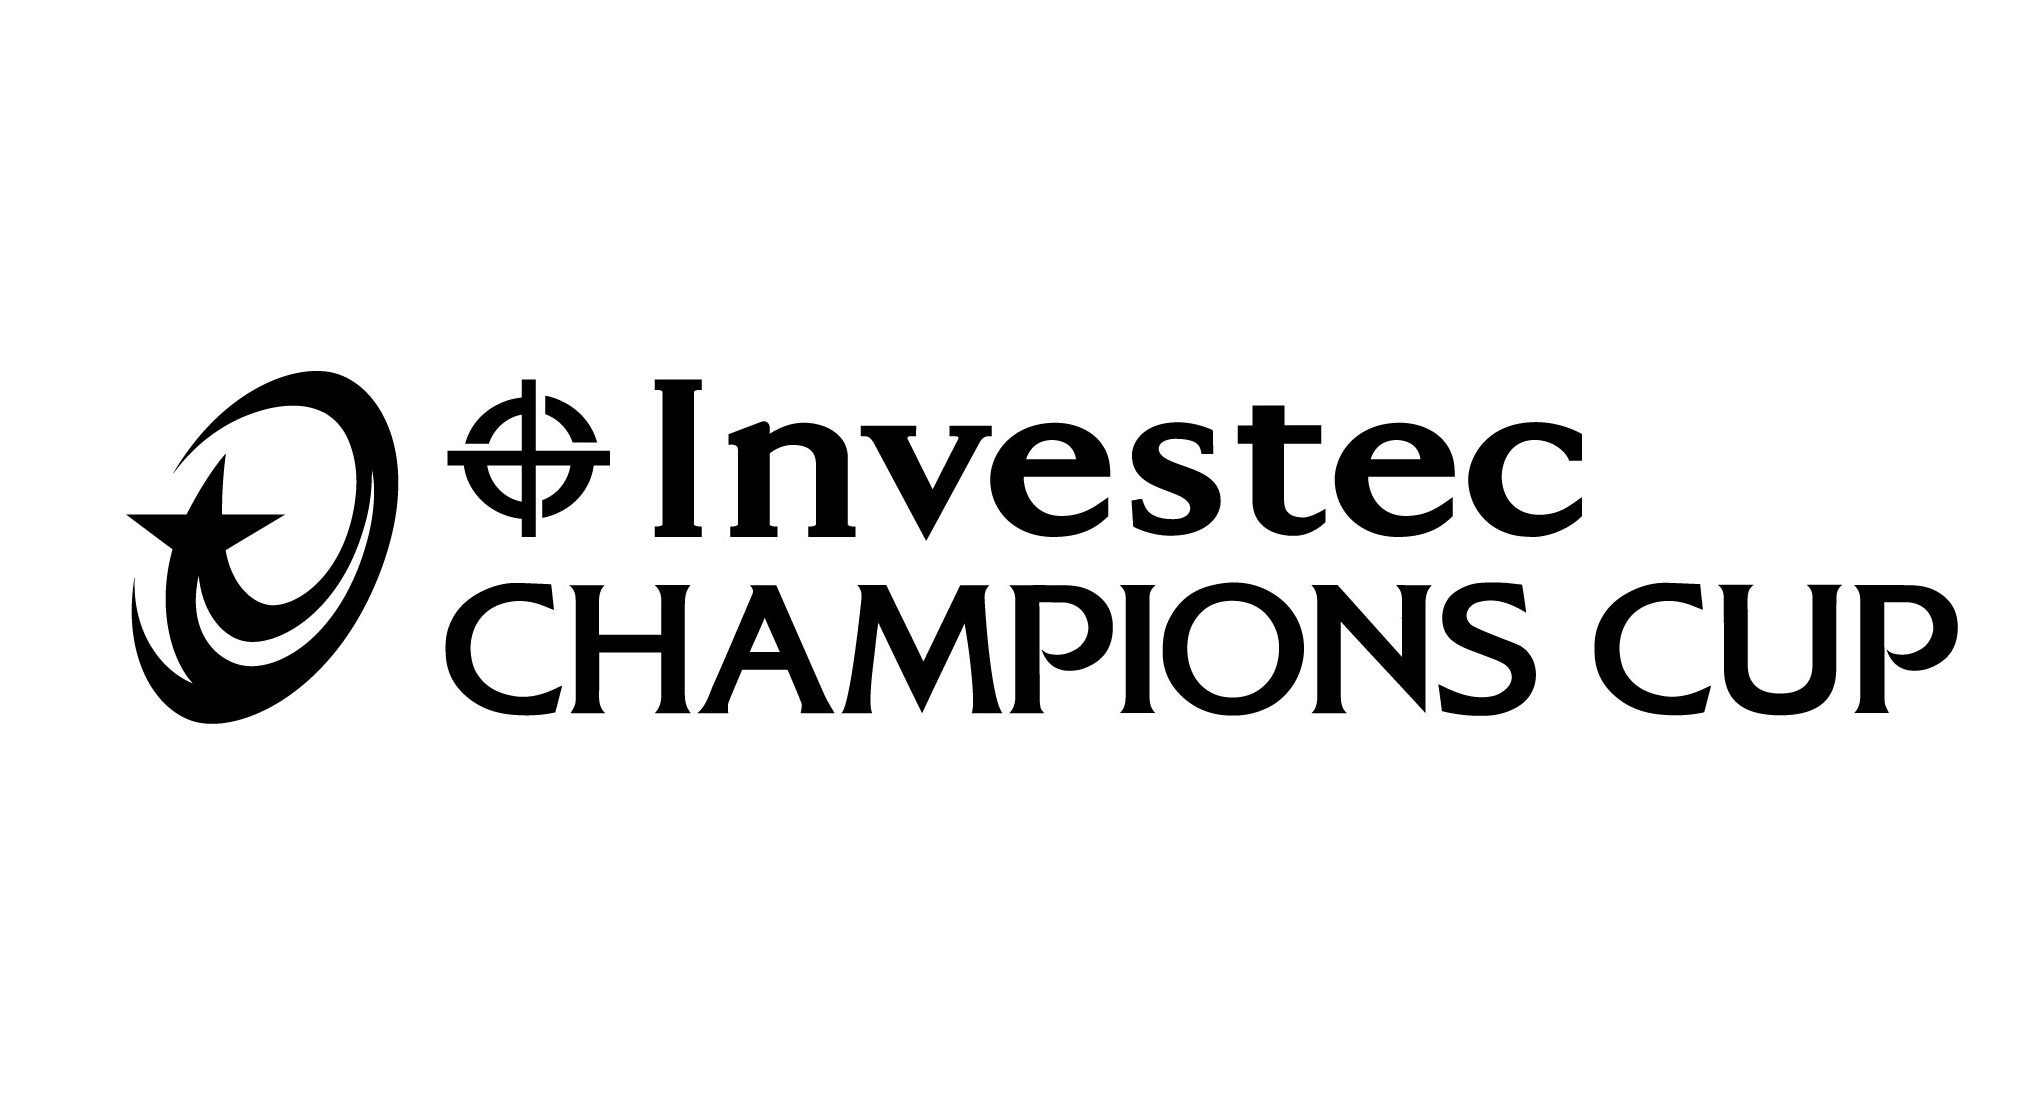 Investec confirmed as new Champions Cup title sponsor